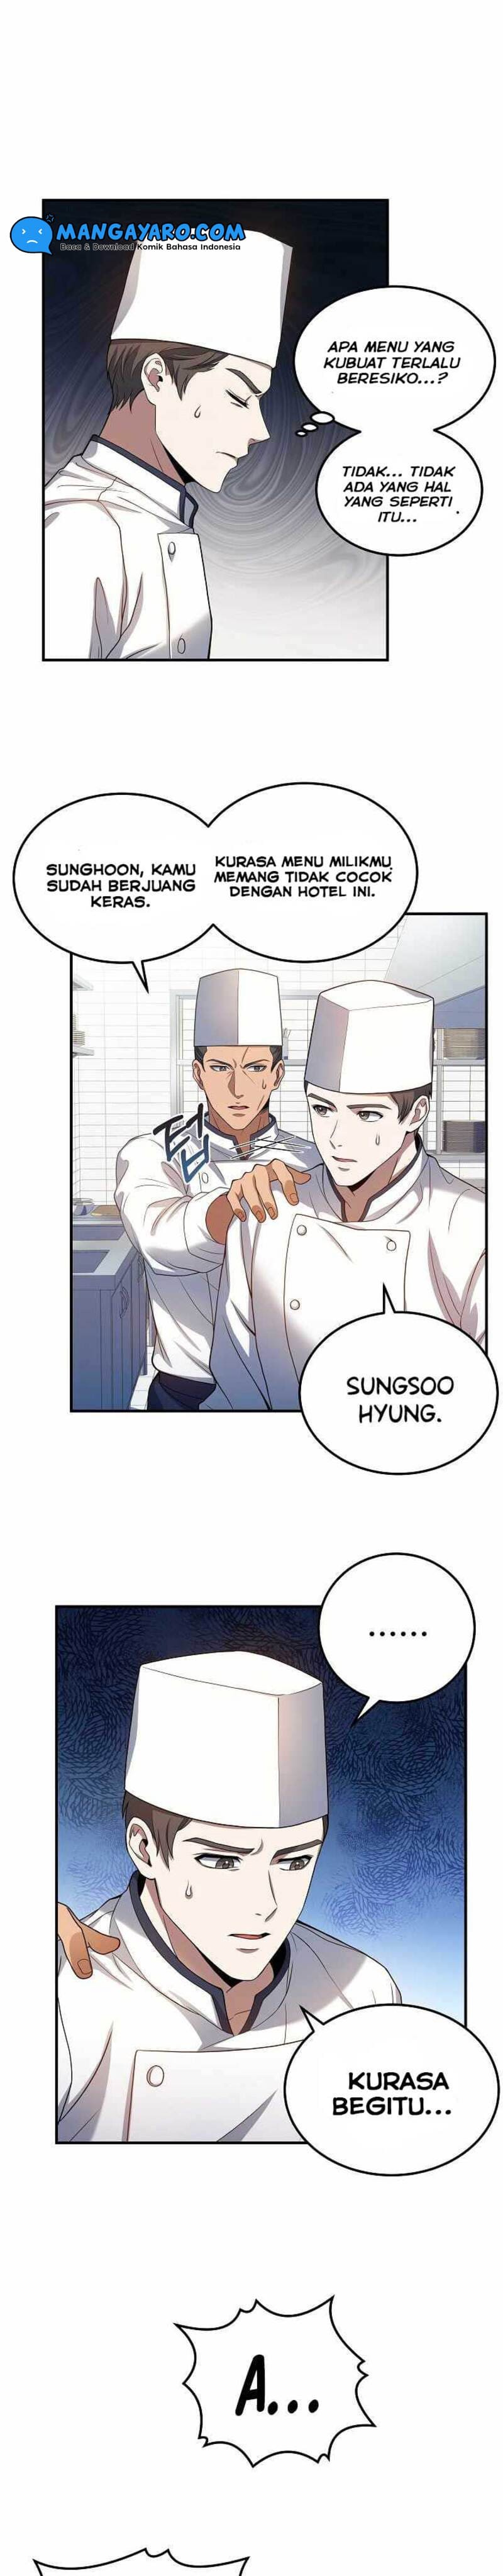 Youngest Chef From the 3rd Rate Hotel Chapter 6